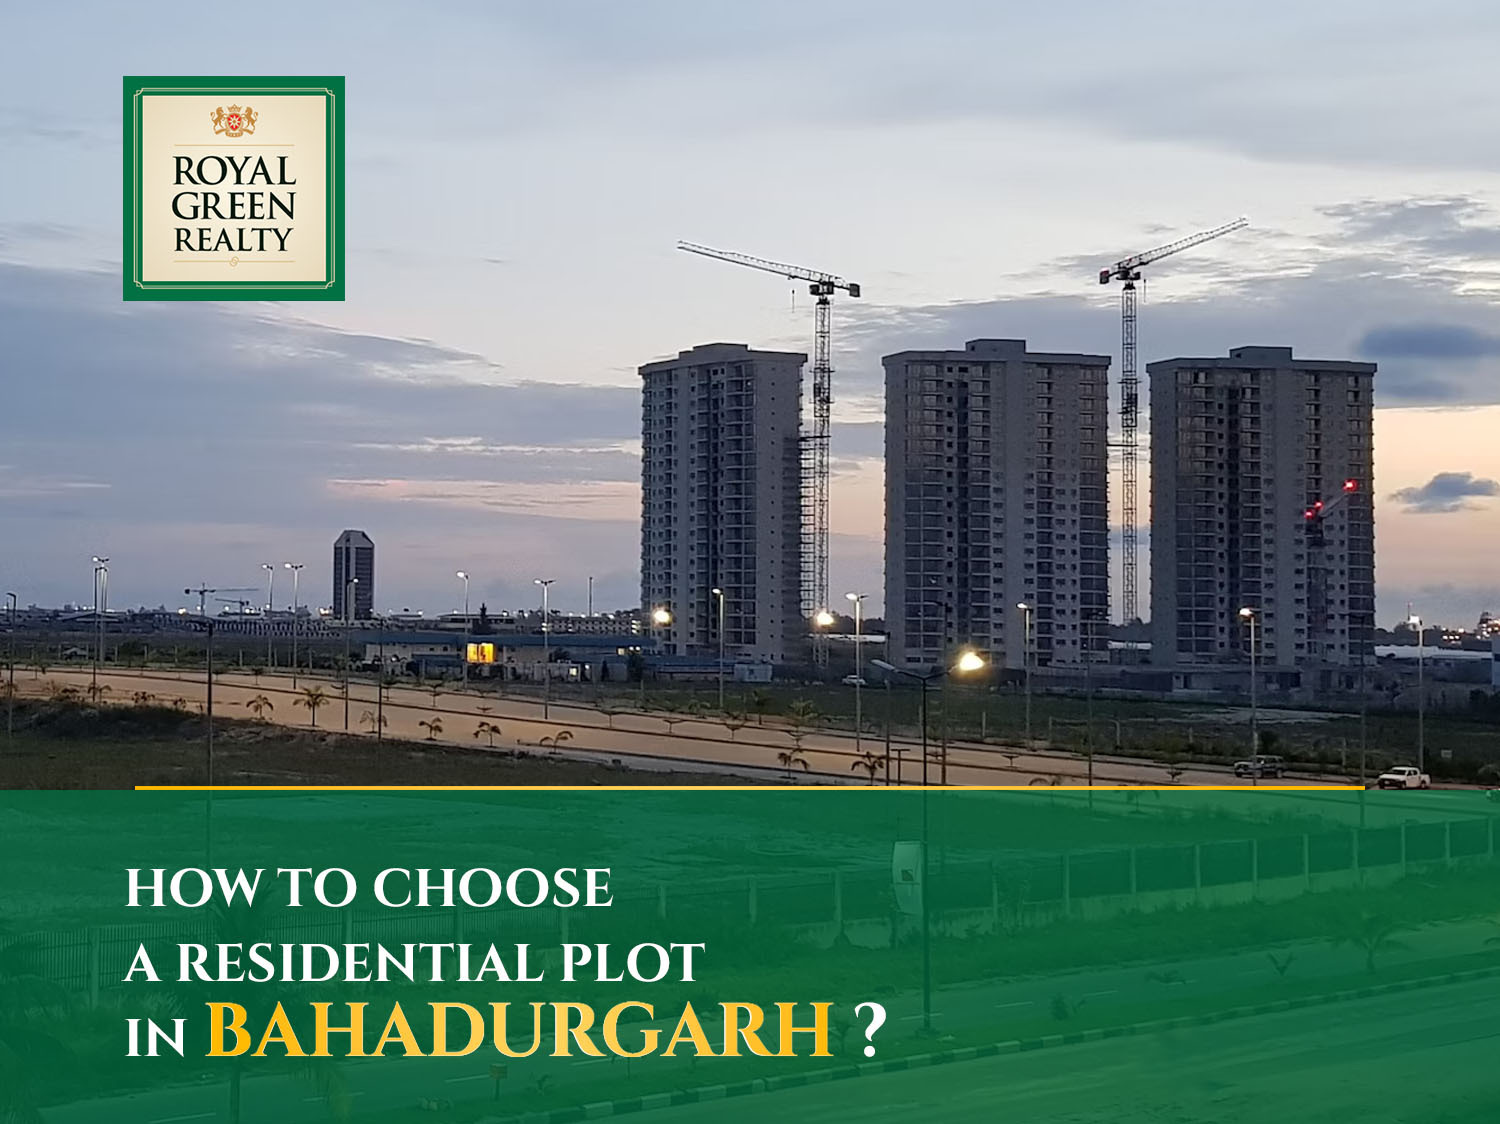 How to choose a residential plot in Bahadurgarh?